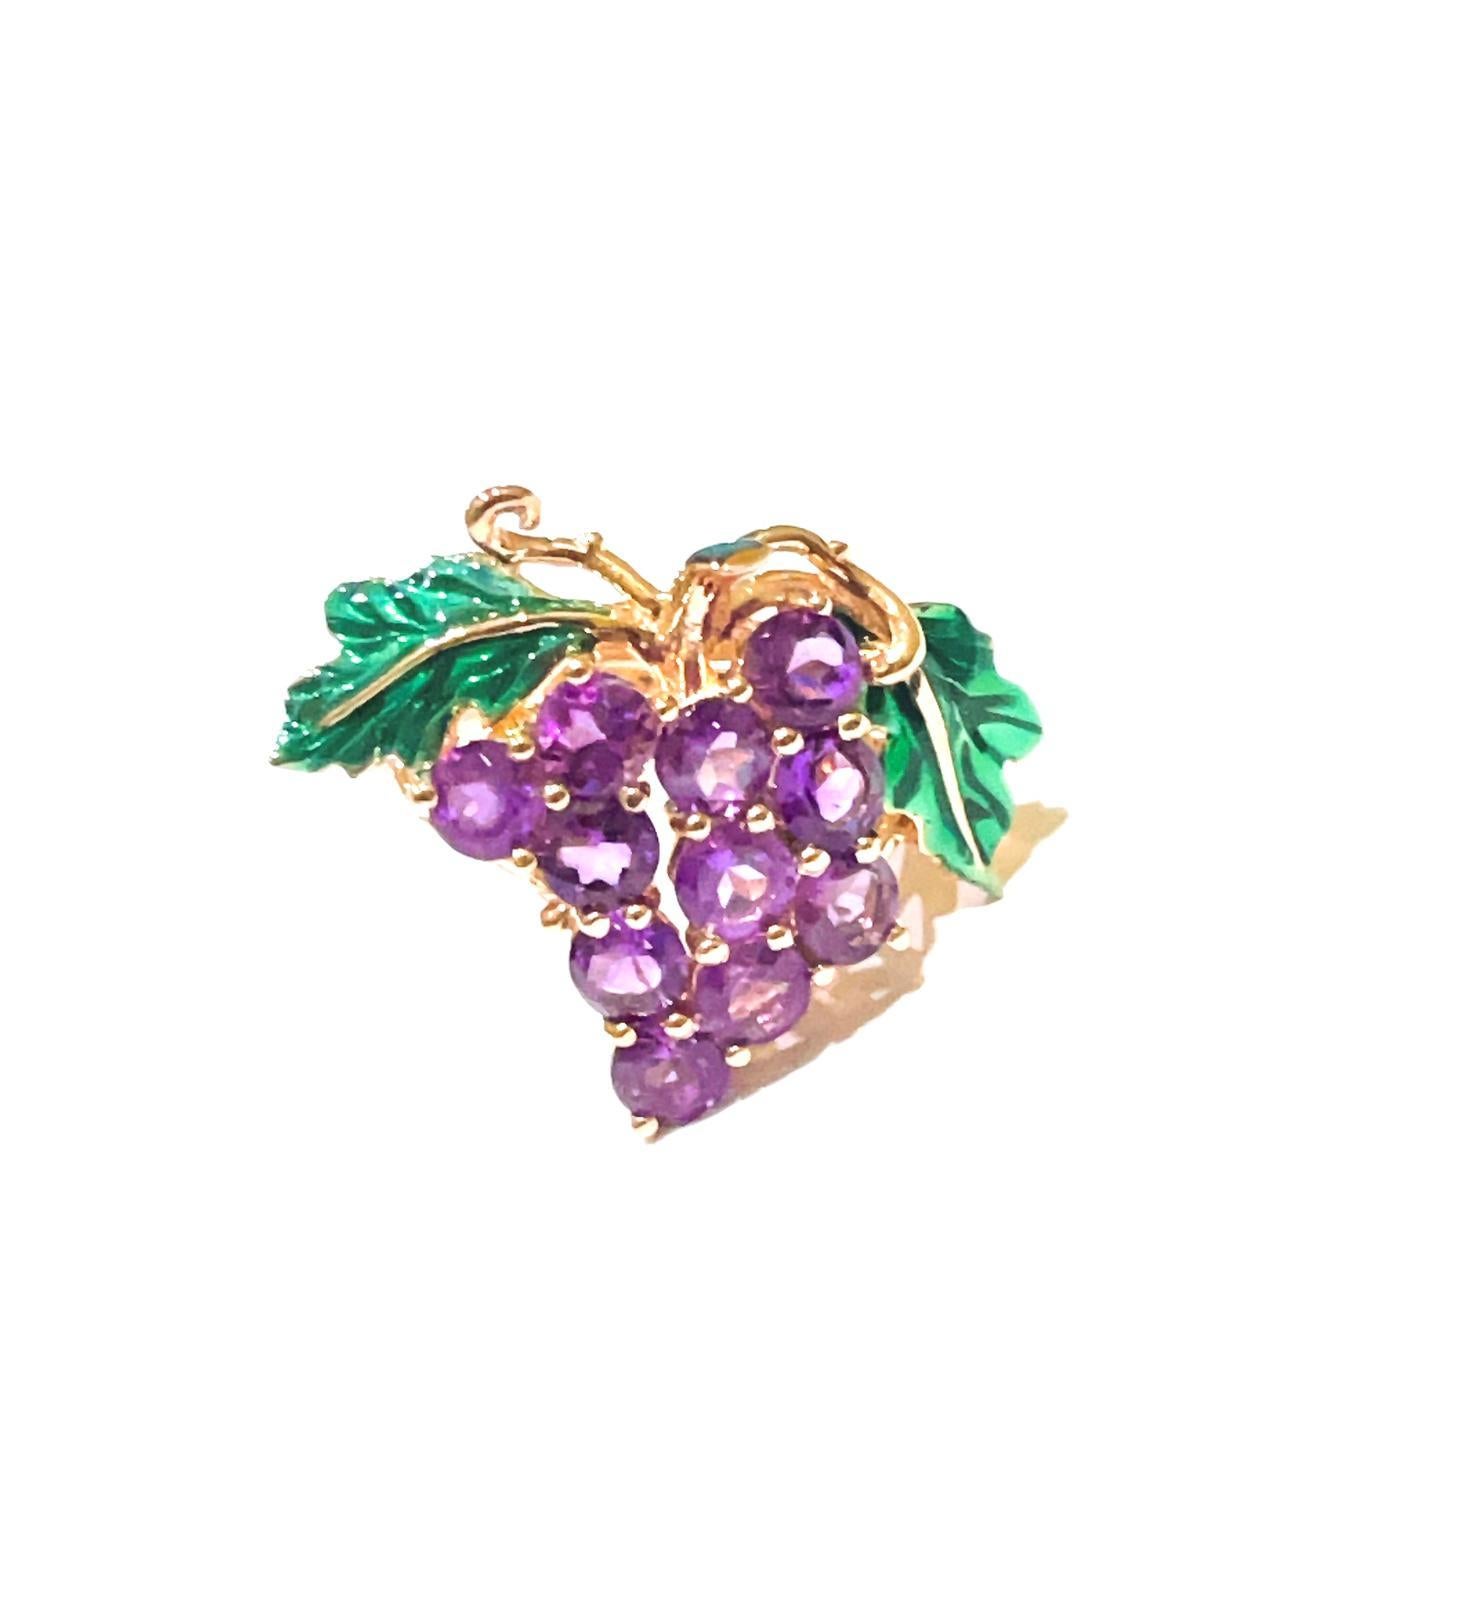 Bochic “Capri” Green Enamel & Purple Amethyst Cocktail Ring 18K Gold & Silver 
Amethyst Purple Rose Cut Gems - 5 Carats 
Green enamel leaves 
The Ring looks like a painting and is from the 